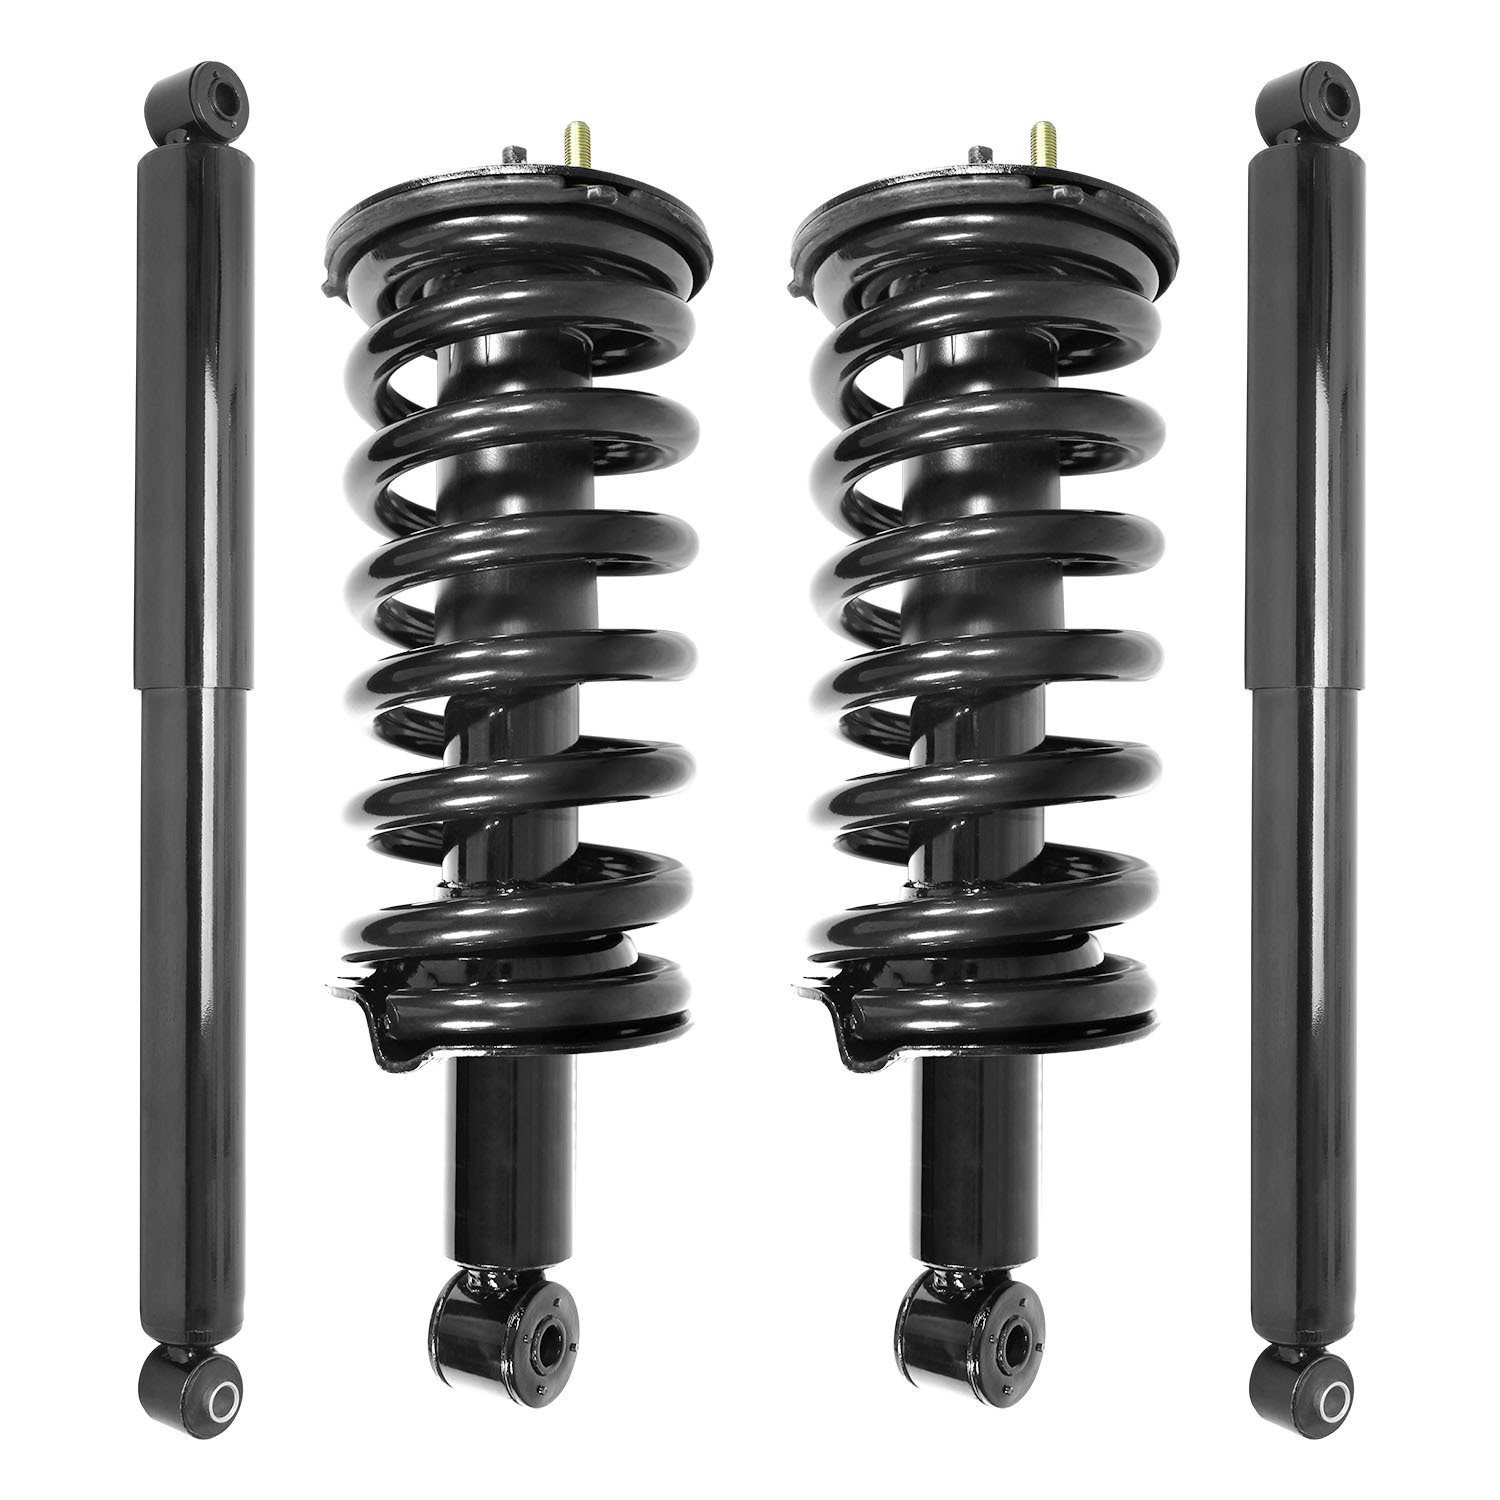 4-11300-255400-001 Front & Rear Suspension Strut & Coil Spring Assembly Fits Select Nissan TITAN